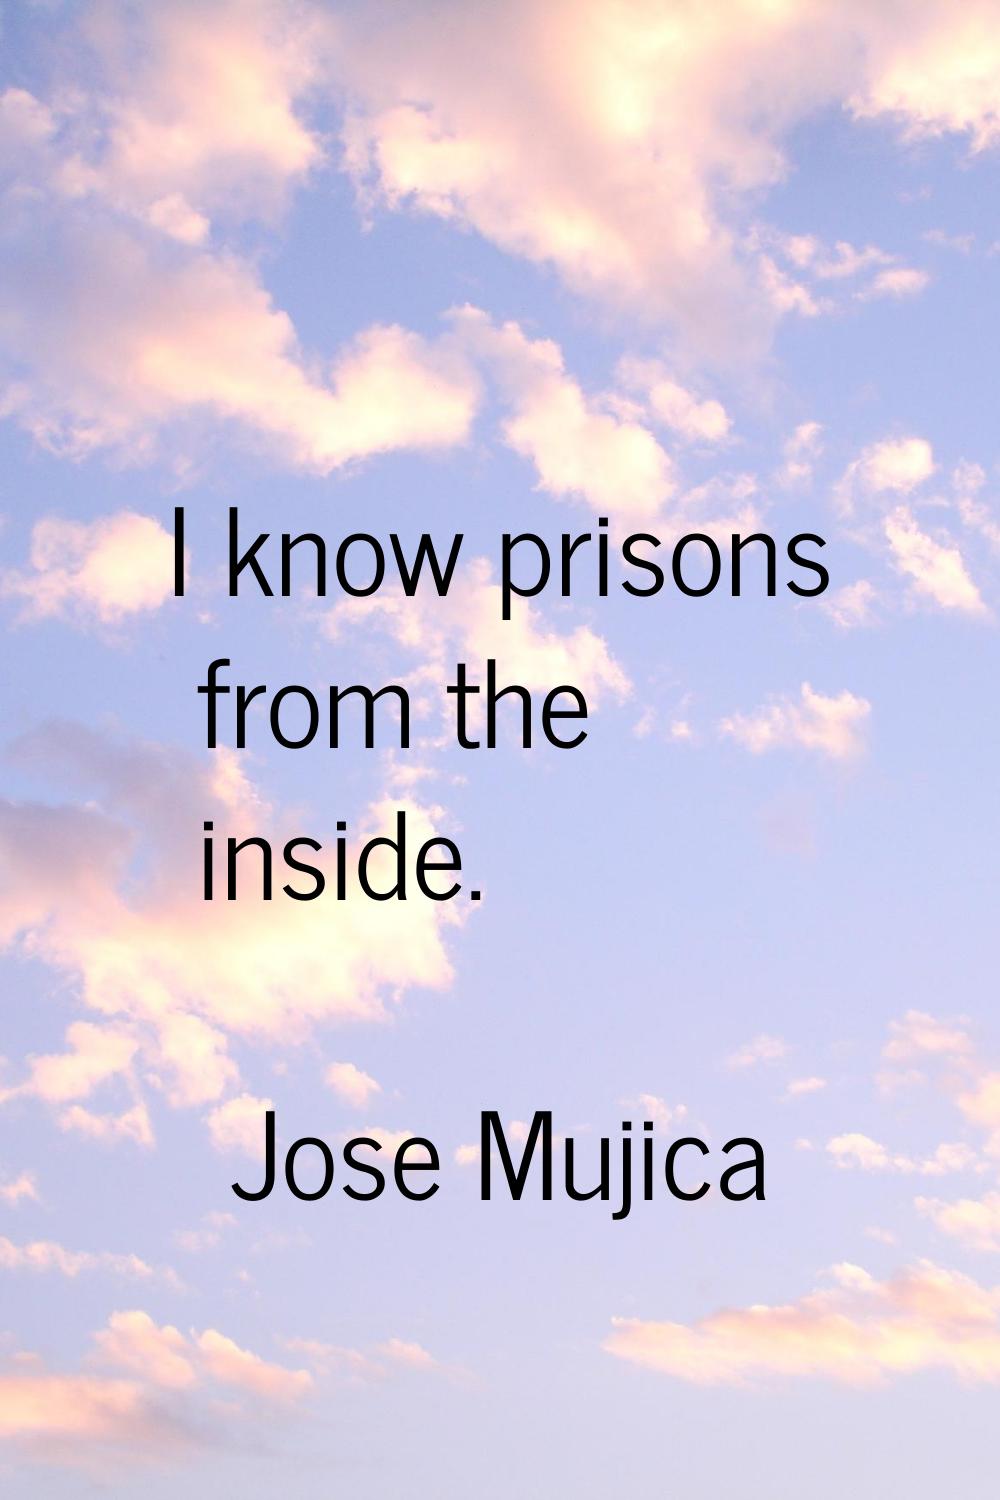 I know prisons from the inside.